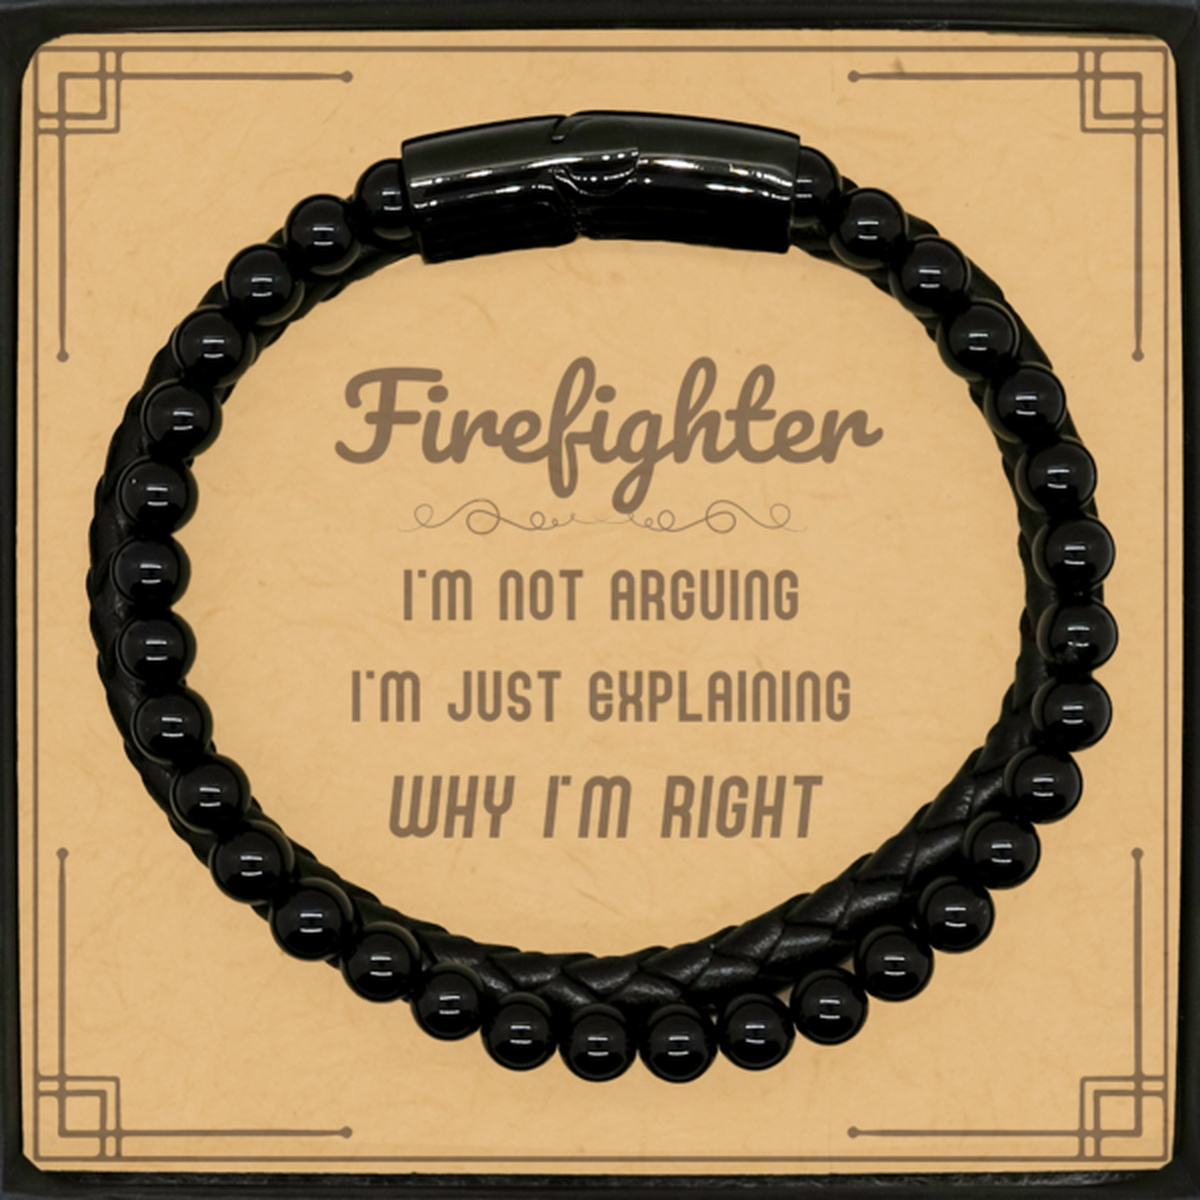 Firefighter I'm not Arguing. I'm Just Explaining Why I'm RIGHT Stone Leather Bracelets, Funny Saying Quote Firefighter Gifts For Firefighter Message Card Graduation Birthday Christmas Gifts for Men Women Coworker